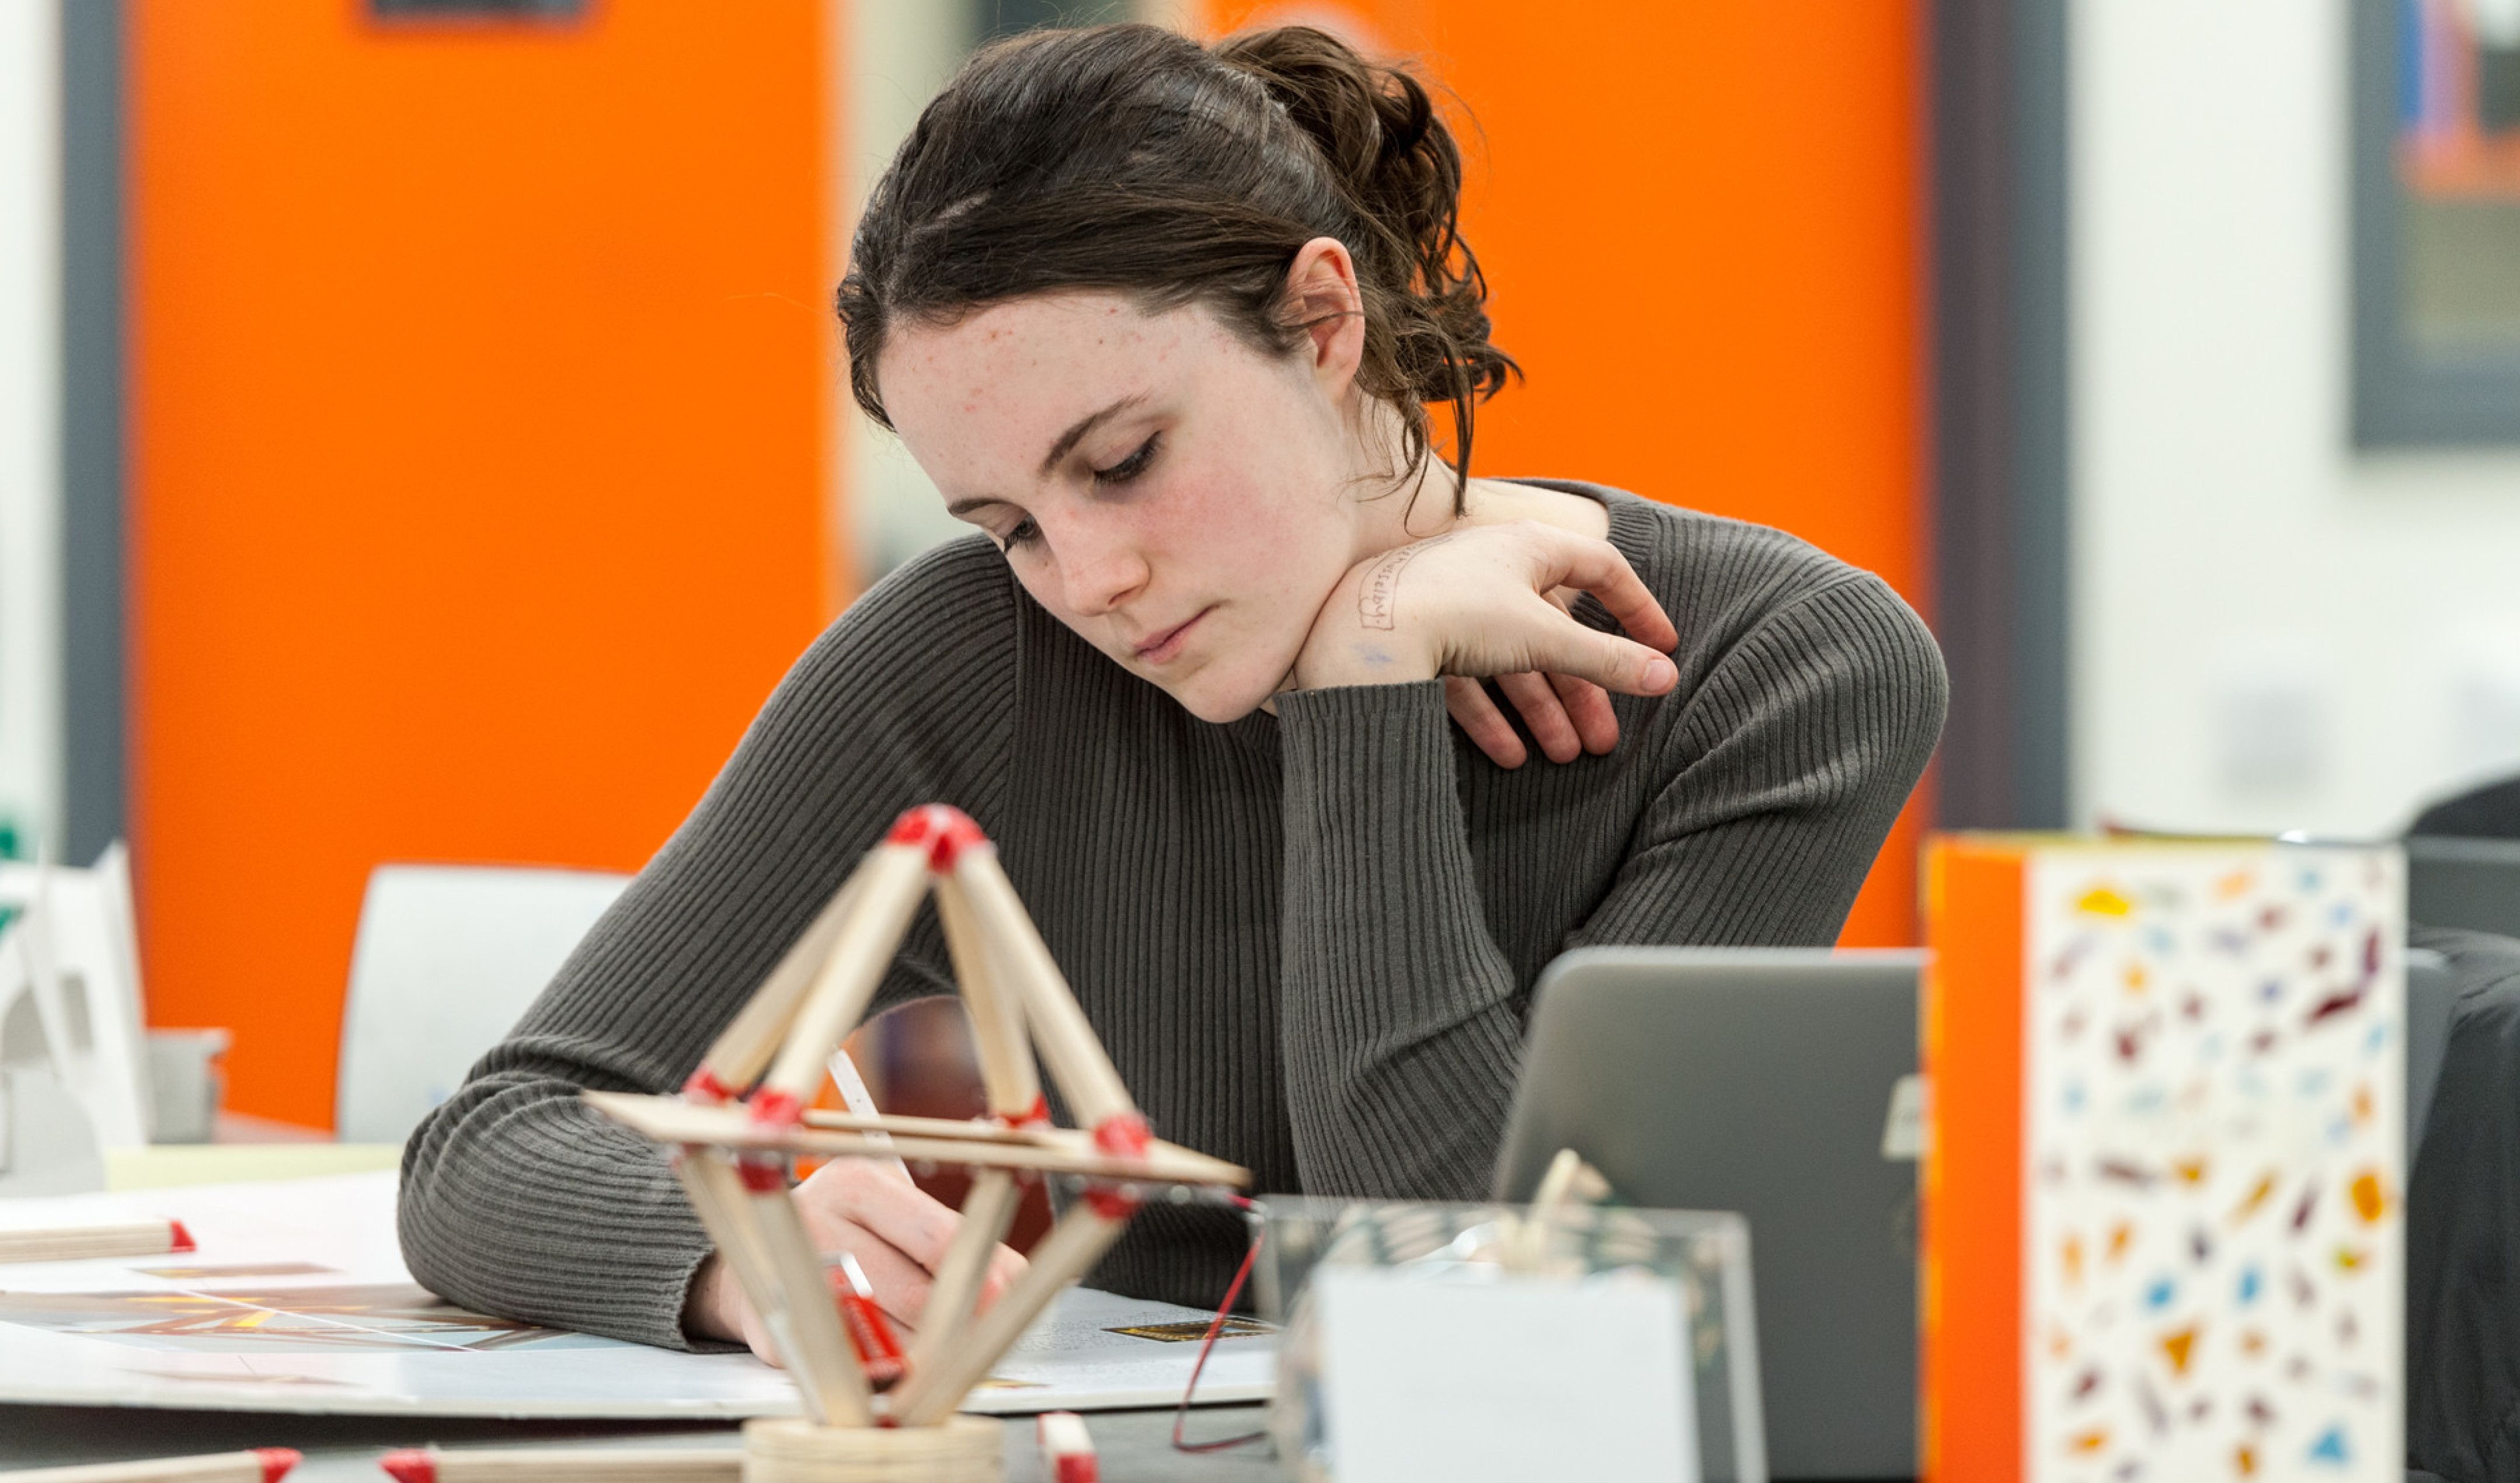 A secondary school student works on her project with her prototype in front of her.